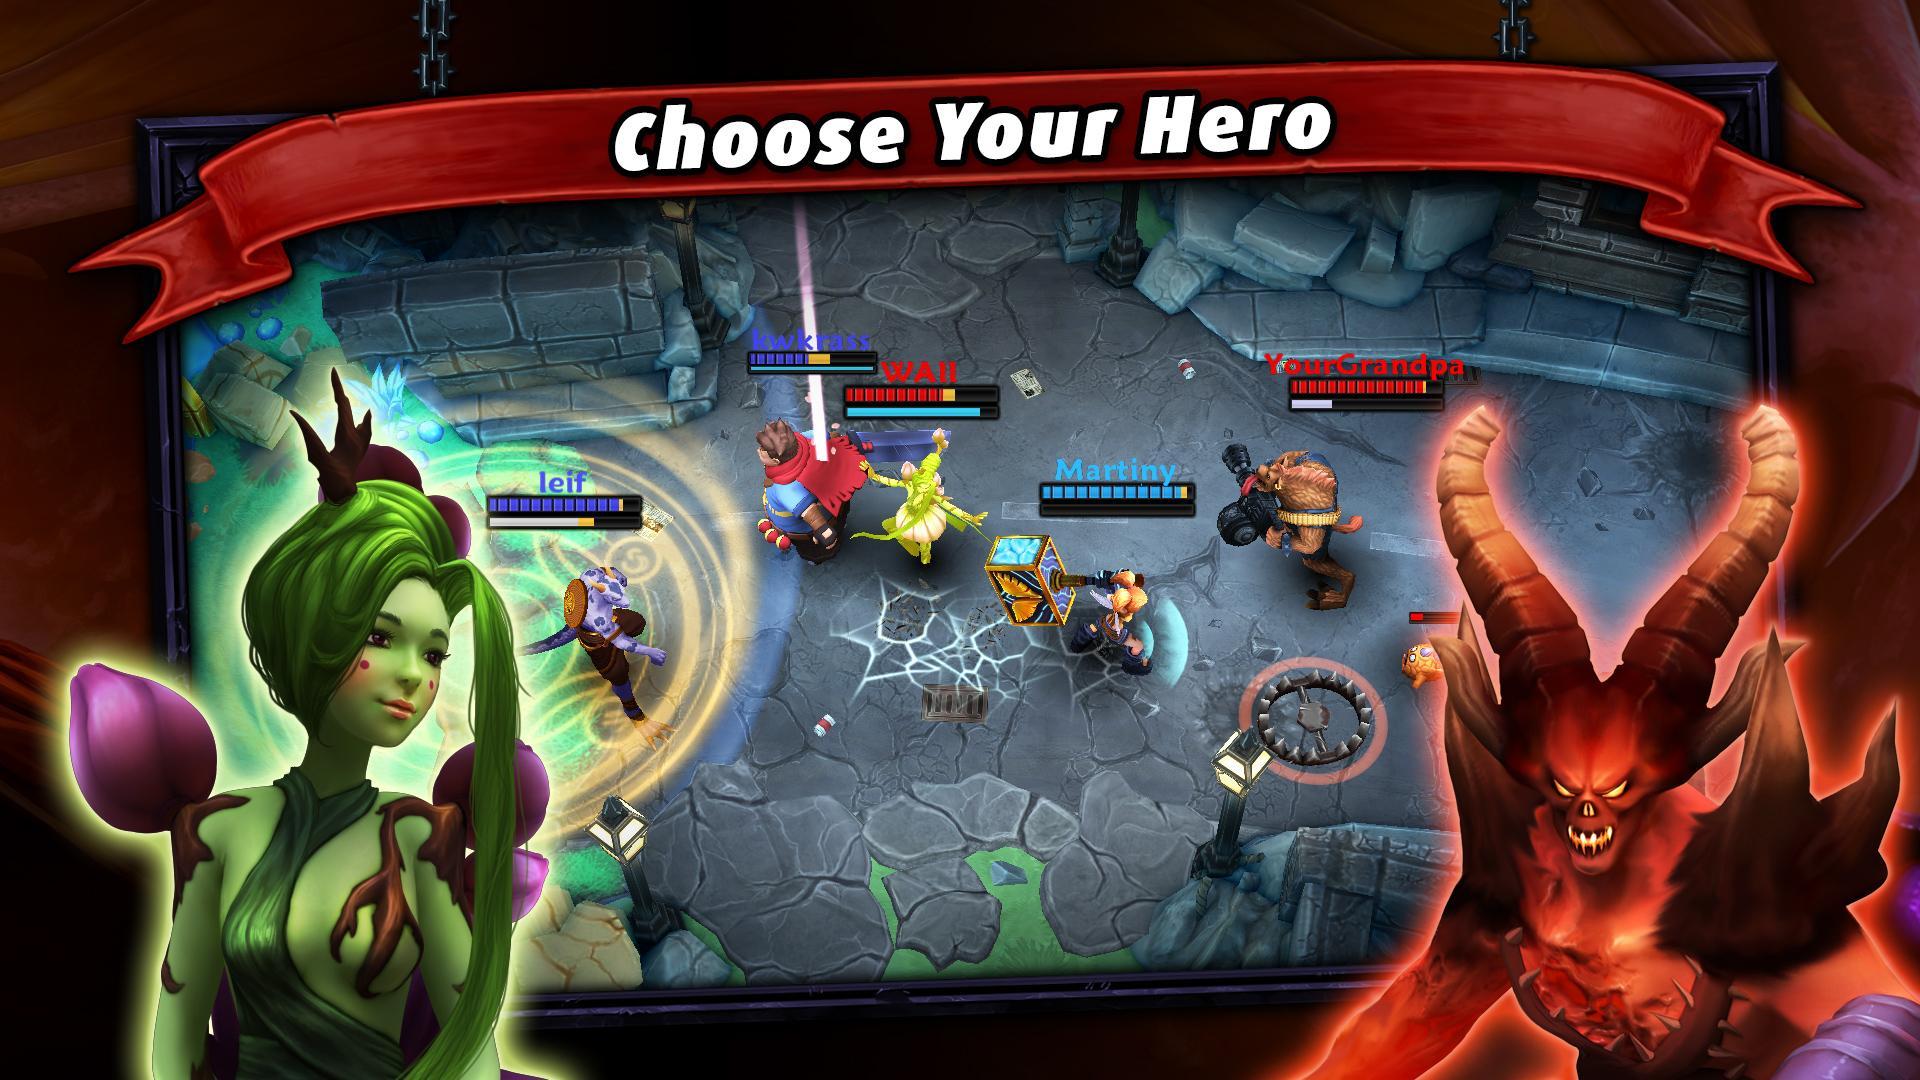 Download Clash of Legendary Titans (MOD) APK for Android